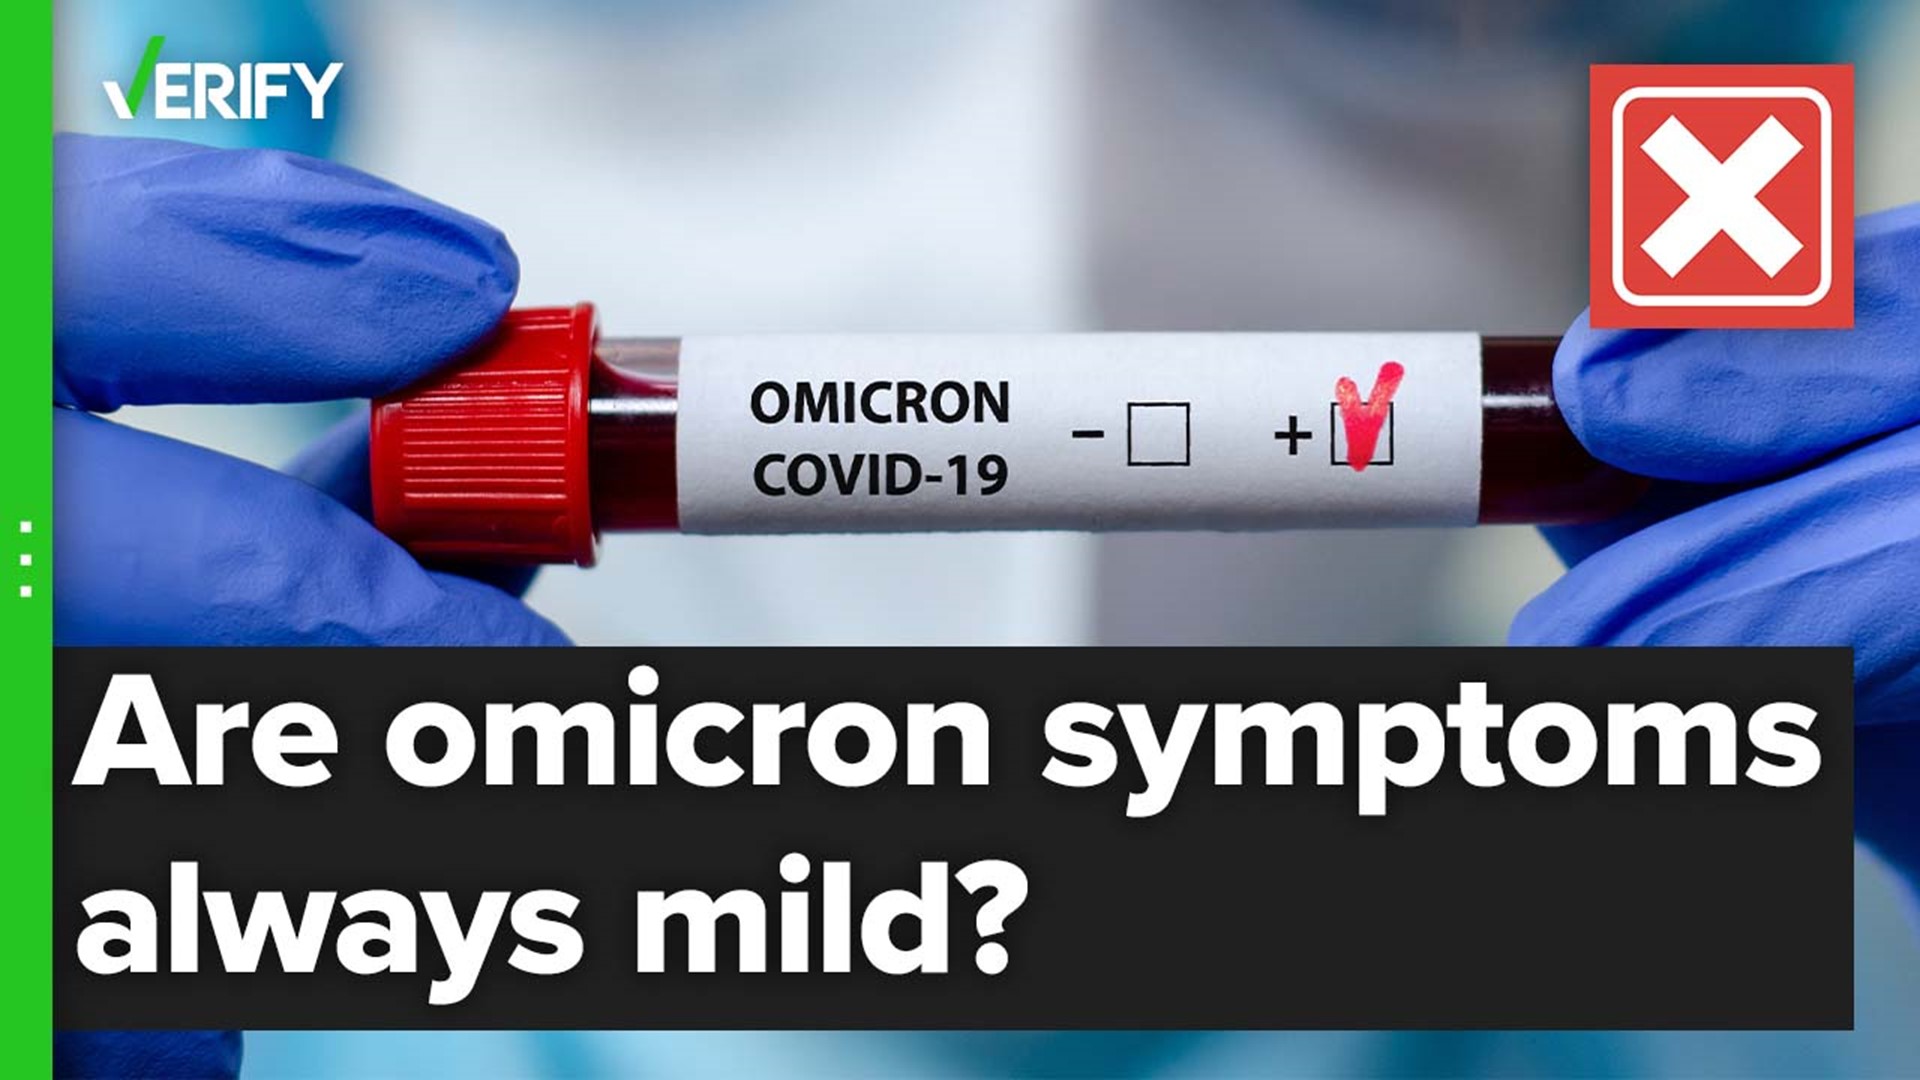 Health officials say it’s still too early to determine omicron’s severity, but they’re certain it can cause the “full spectrum of disease.”